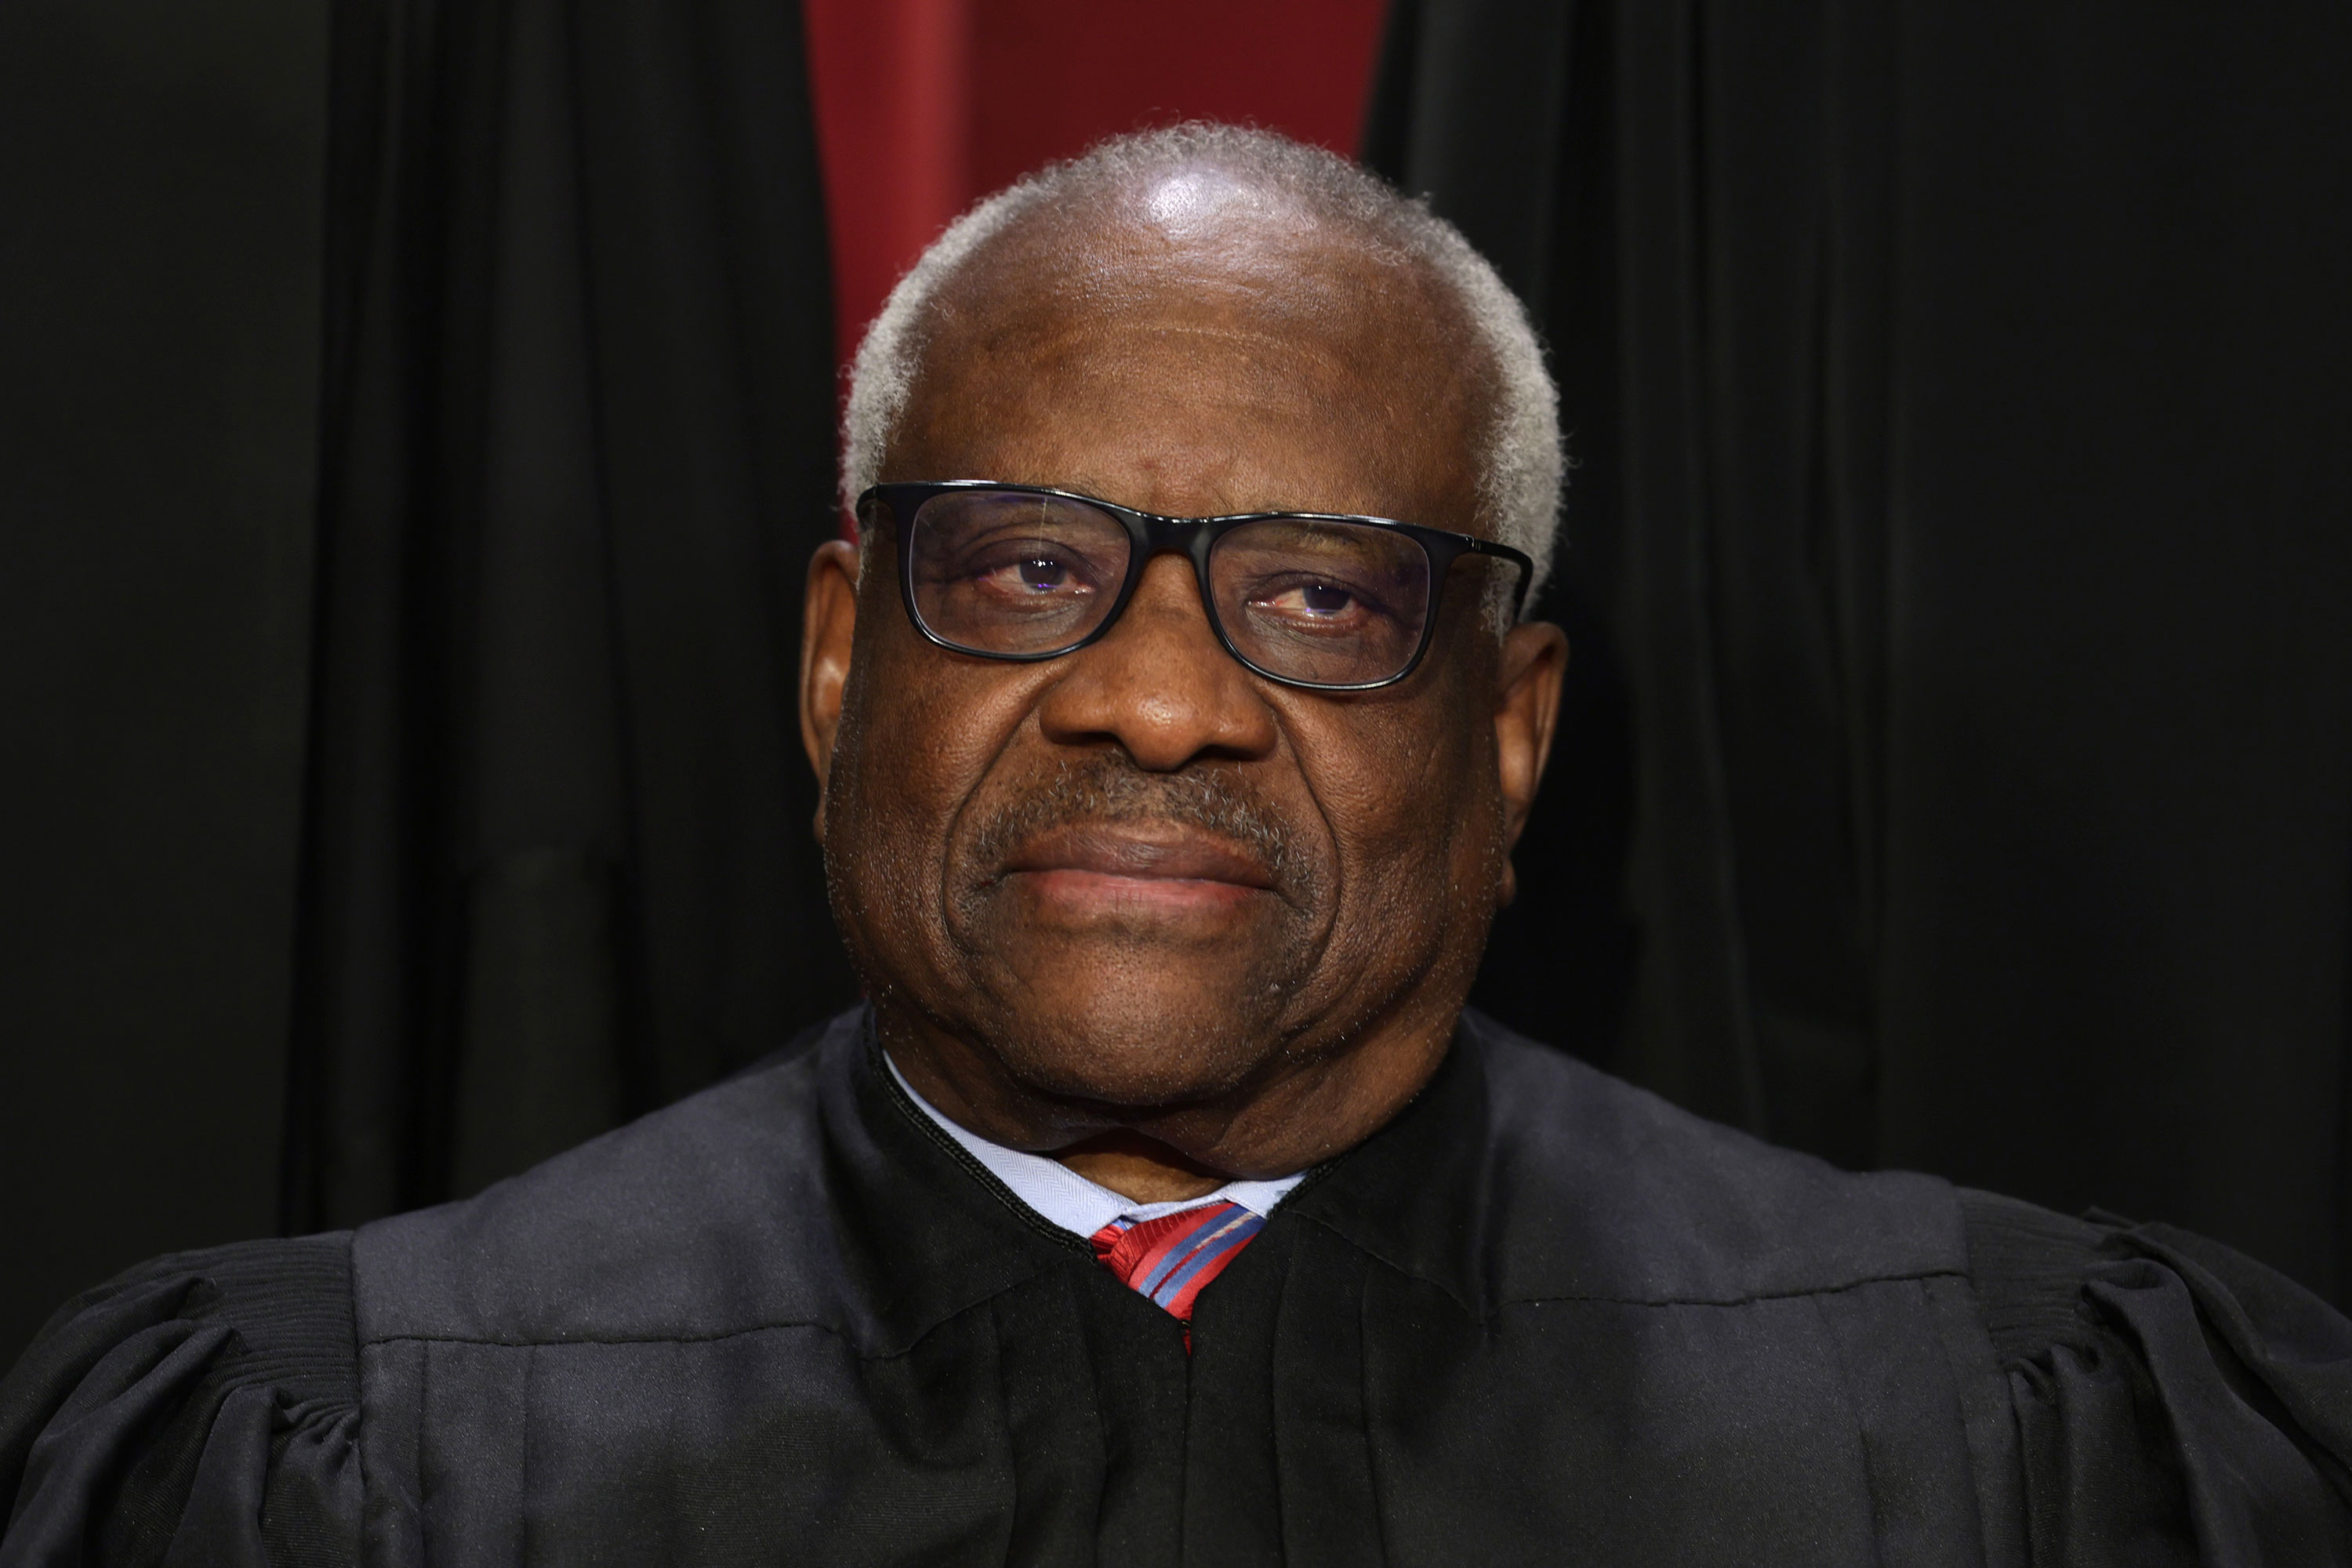 Justice Clarence Thomas poses for an official portrait in October 2022.